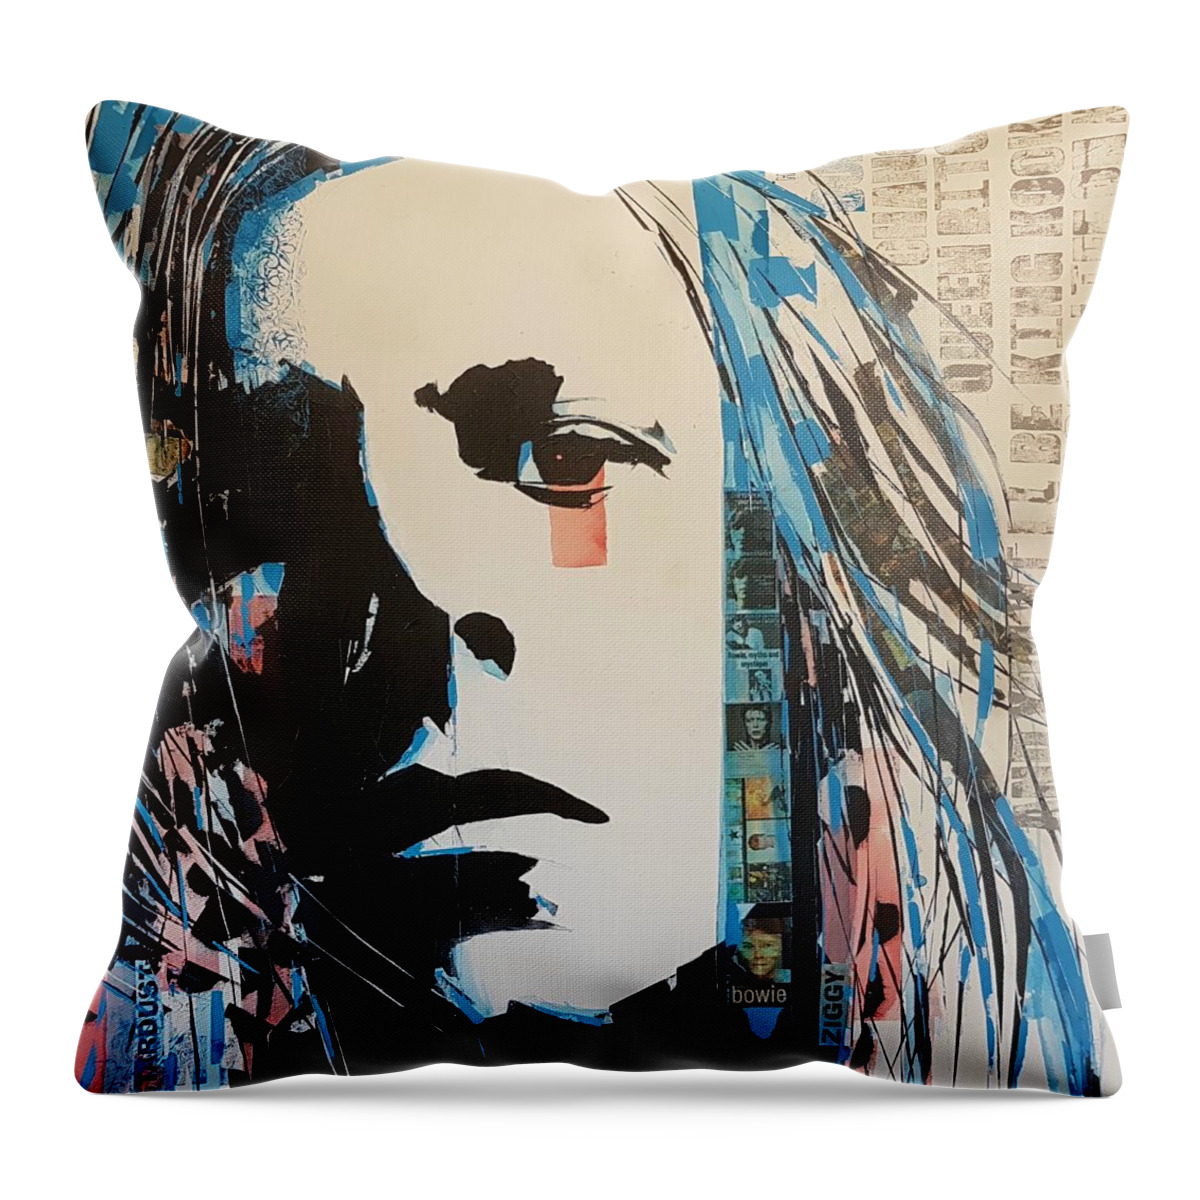 David Bowie Art Throw Pillow featuring the painting Hunky Dory Bowie by Paul Lovering